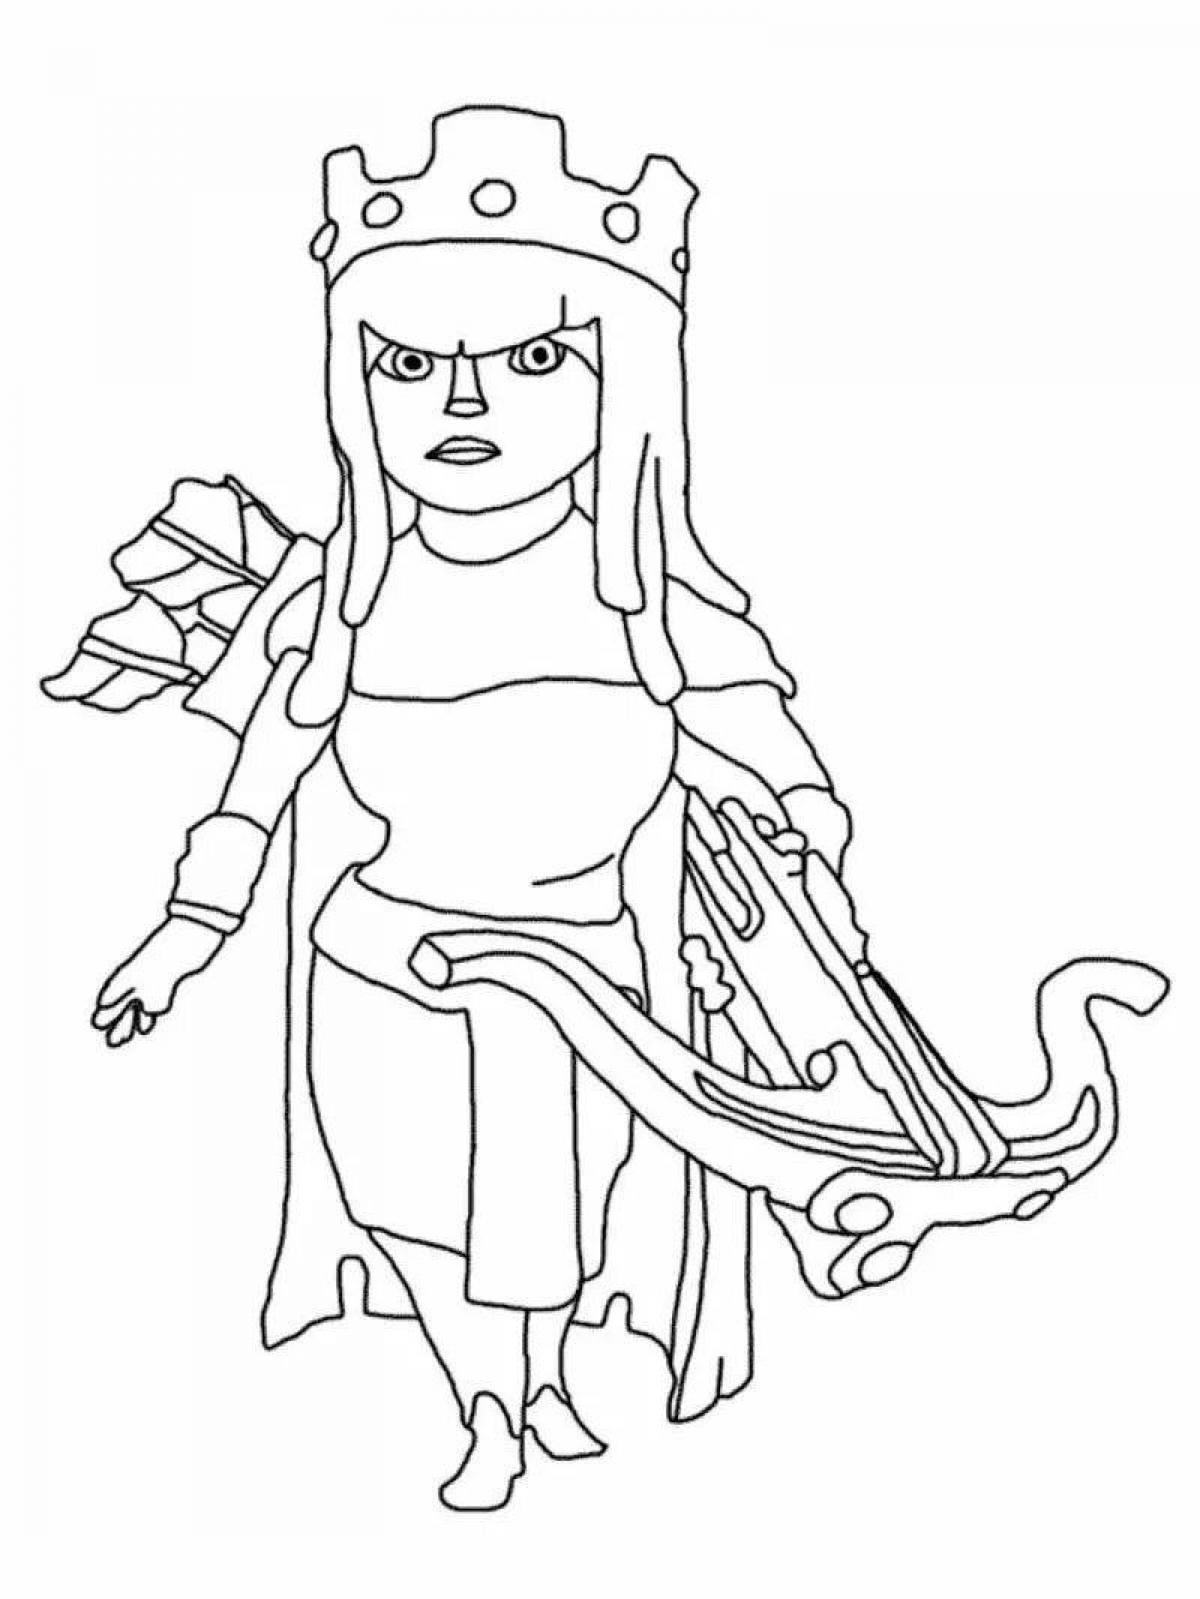 Tempting clash of clans coloring page